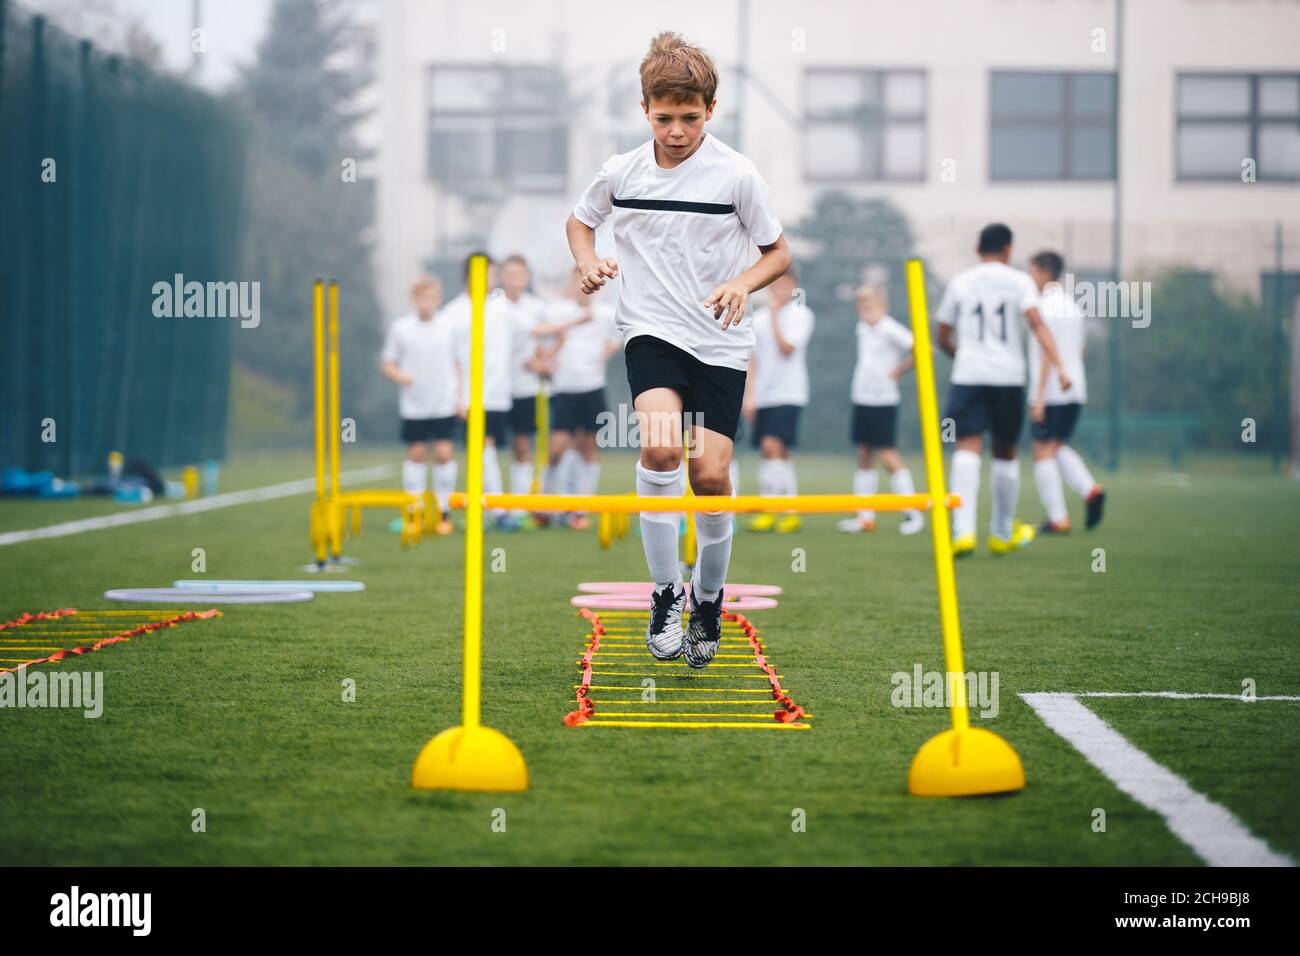 Boys on Agility Training on School Soccer Pitch. Athlete Soccer Player In Training. Young Boy Running Through Ladder and Skipping. Agility Ladder Dril Stock Photo